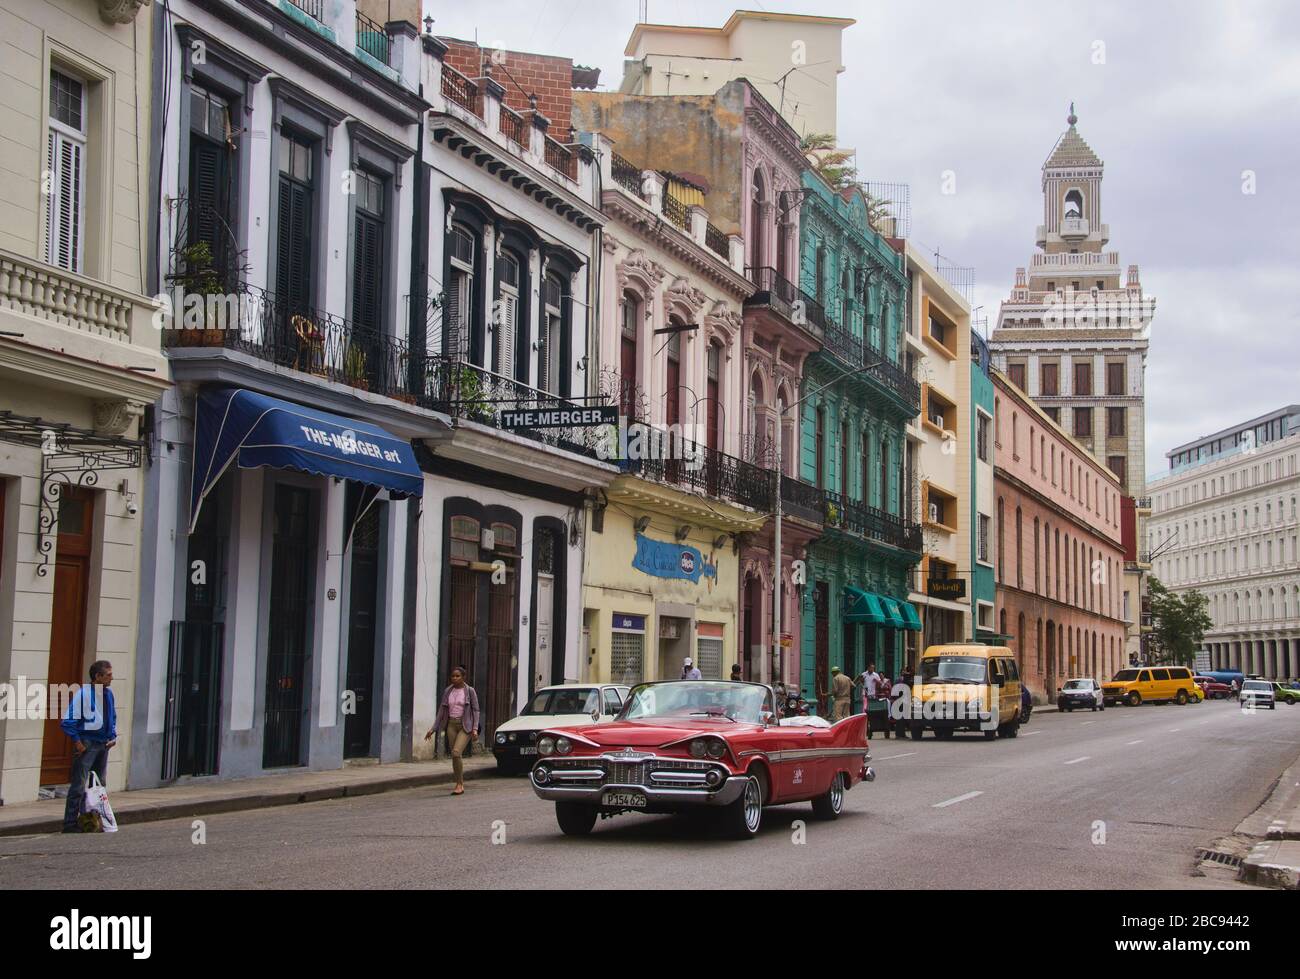 Classic cars and colonial architecture, Havana, Cuba Stock Photo